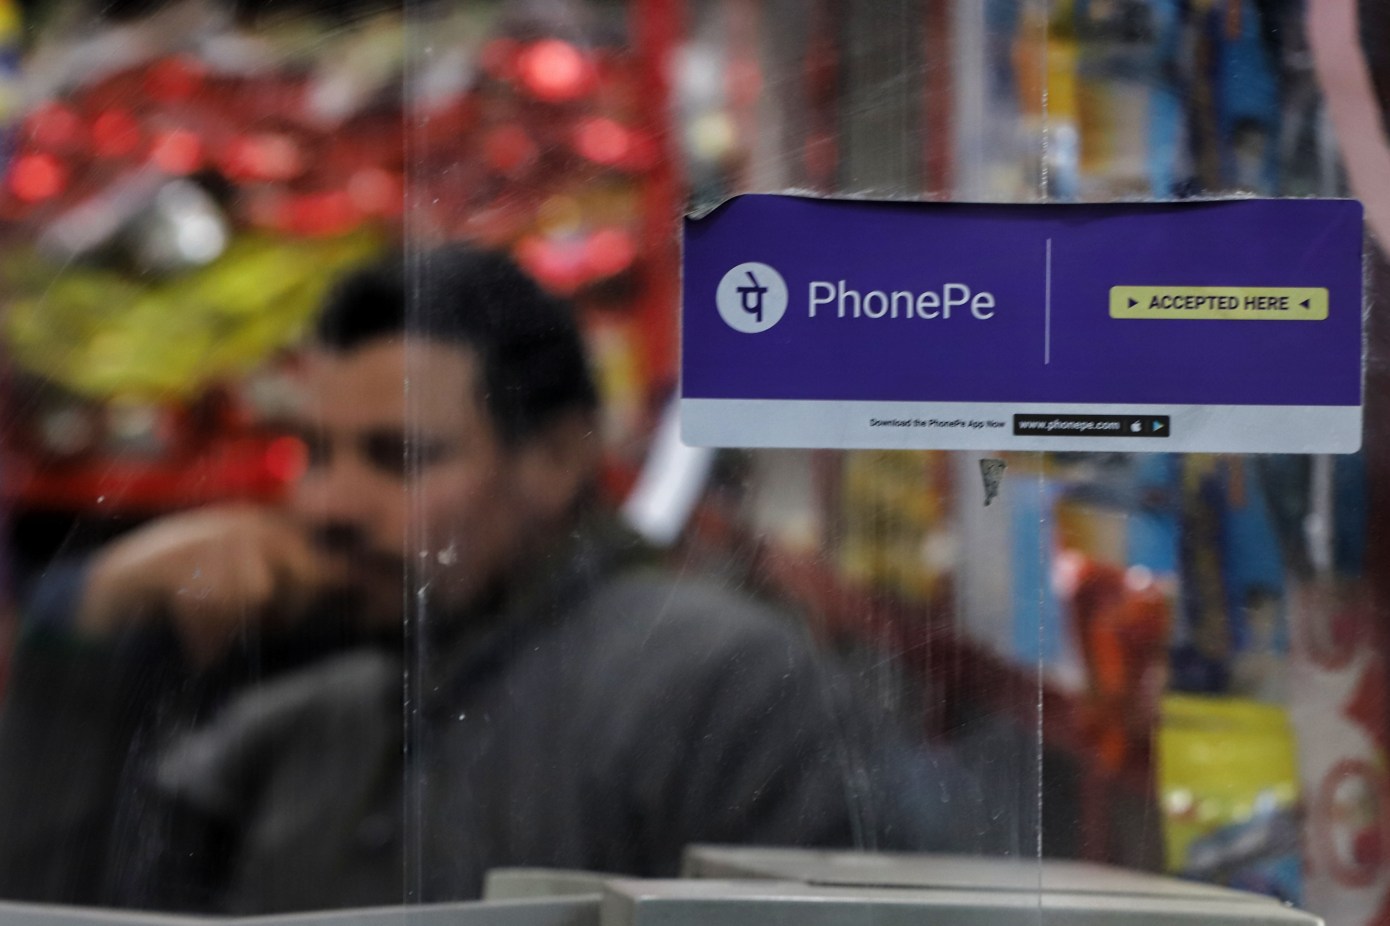 PhonePe in talks to acquire Indian app store Indus OS